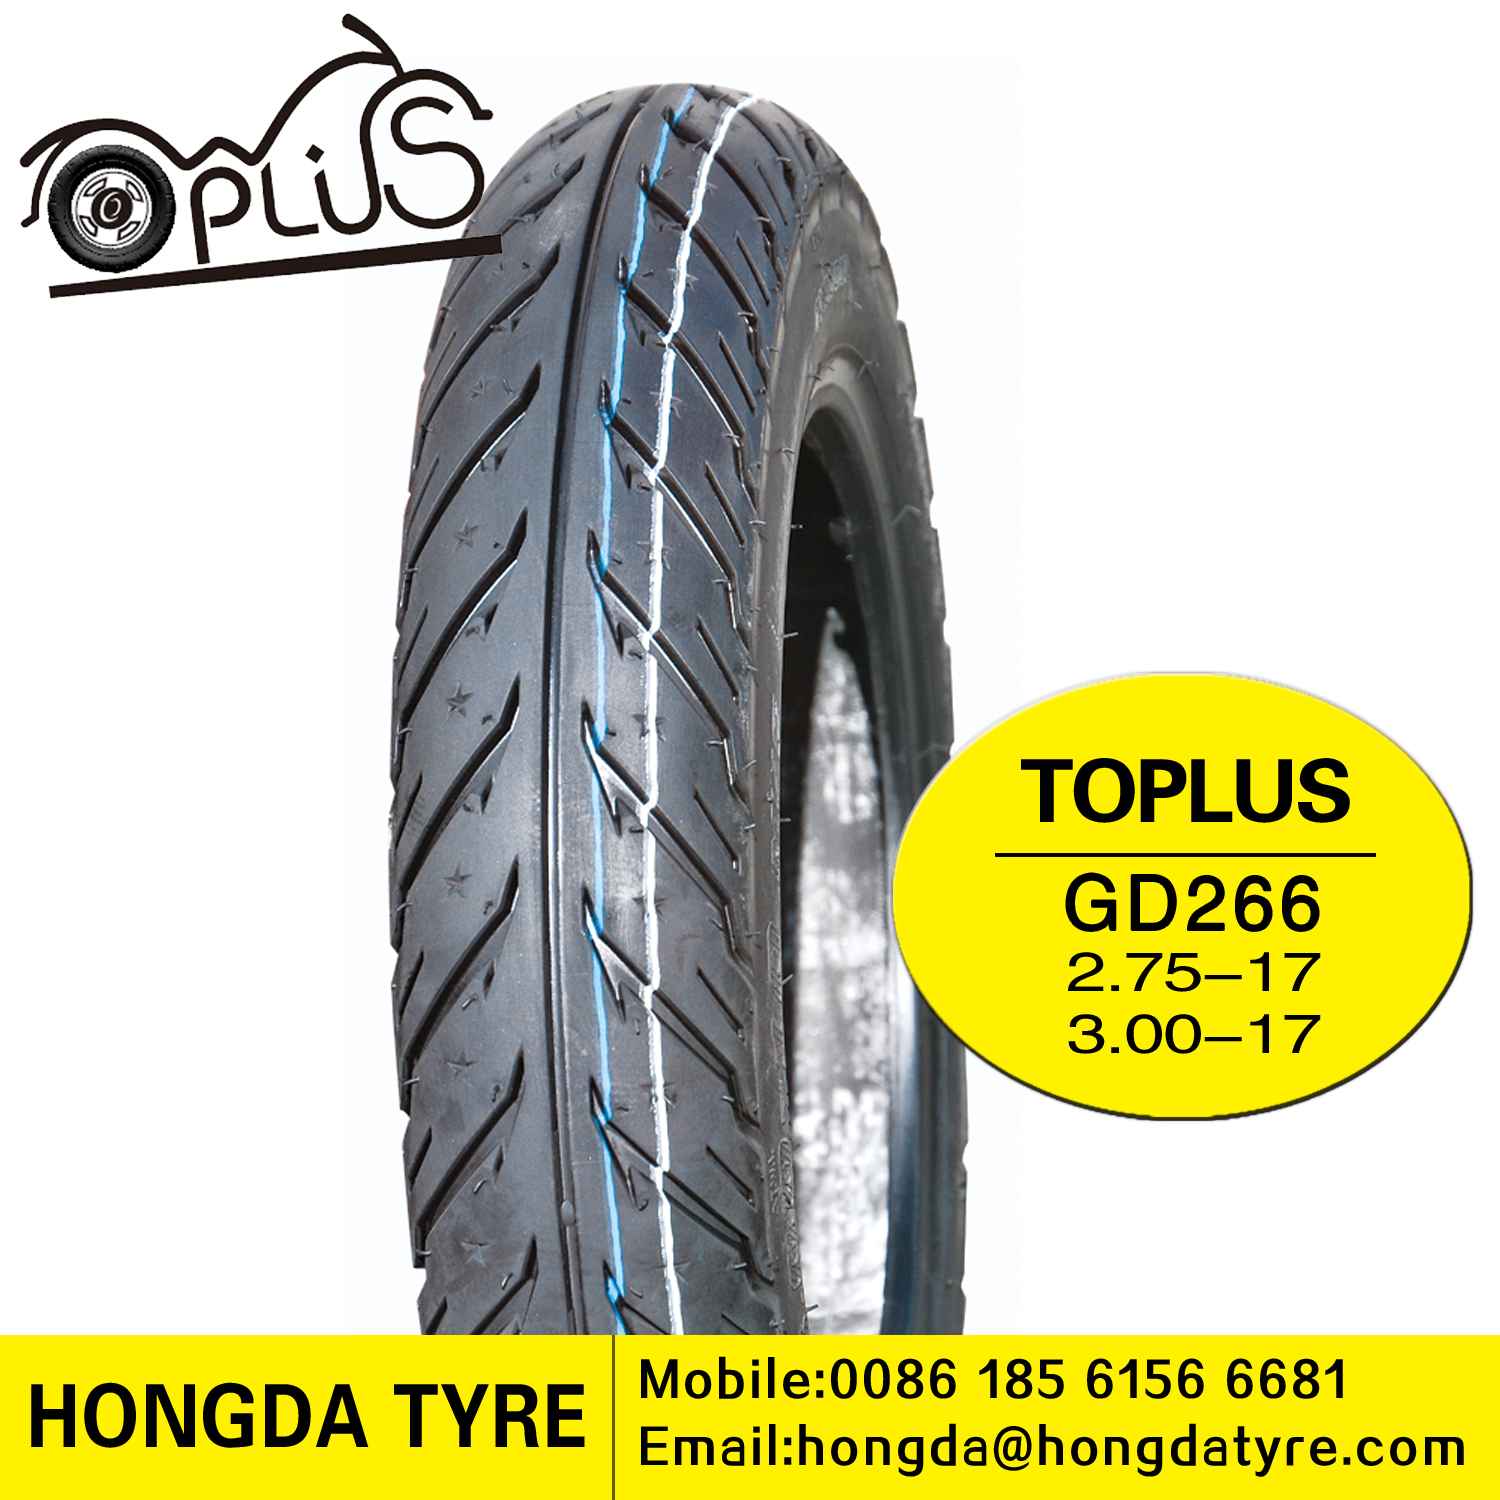 Motorcycle tyre GD266